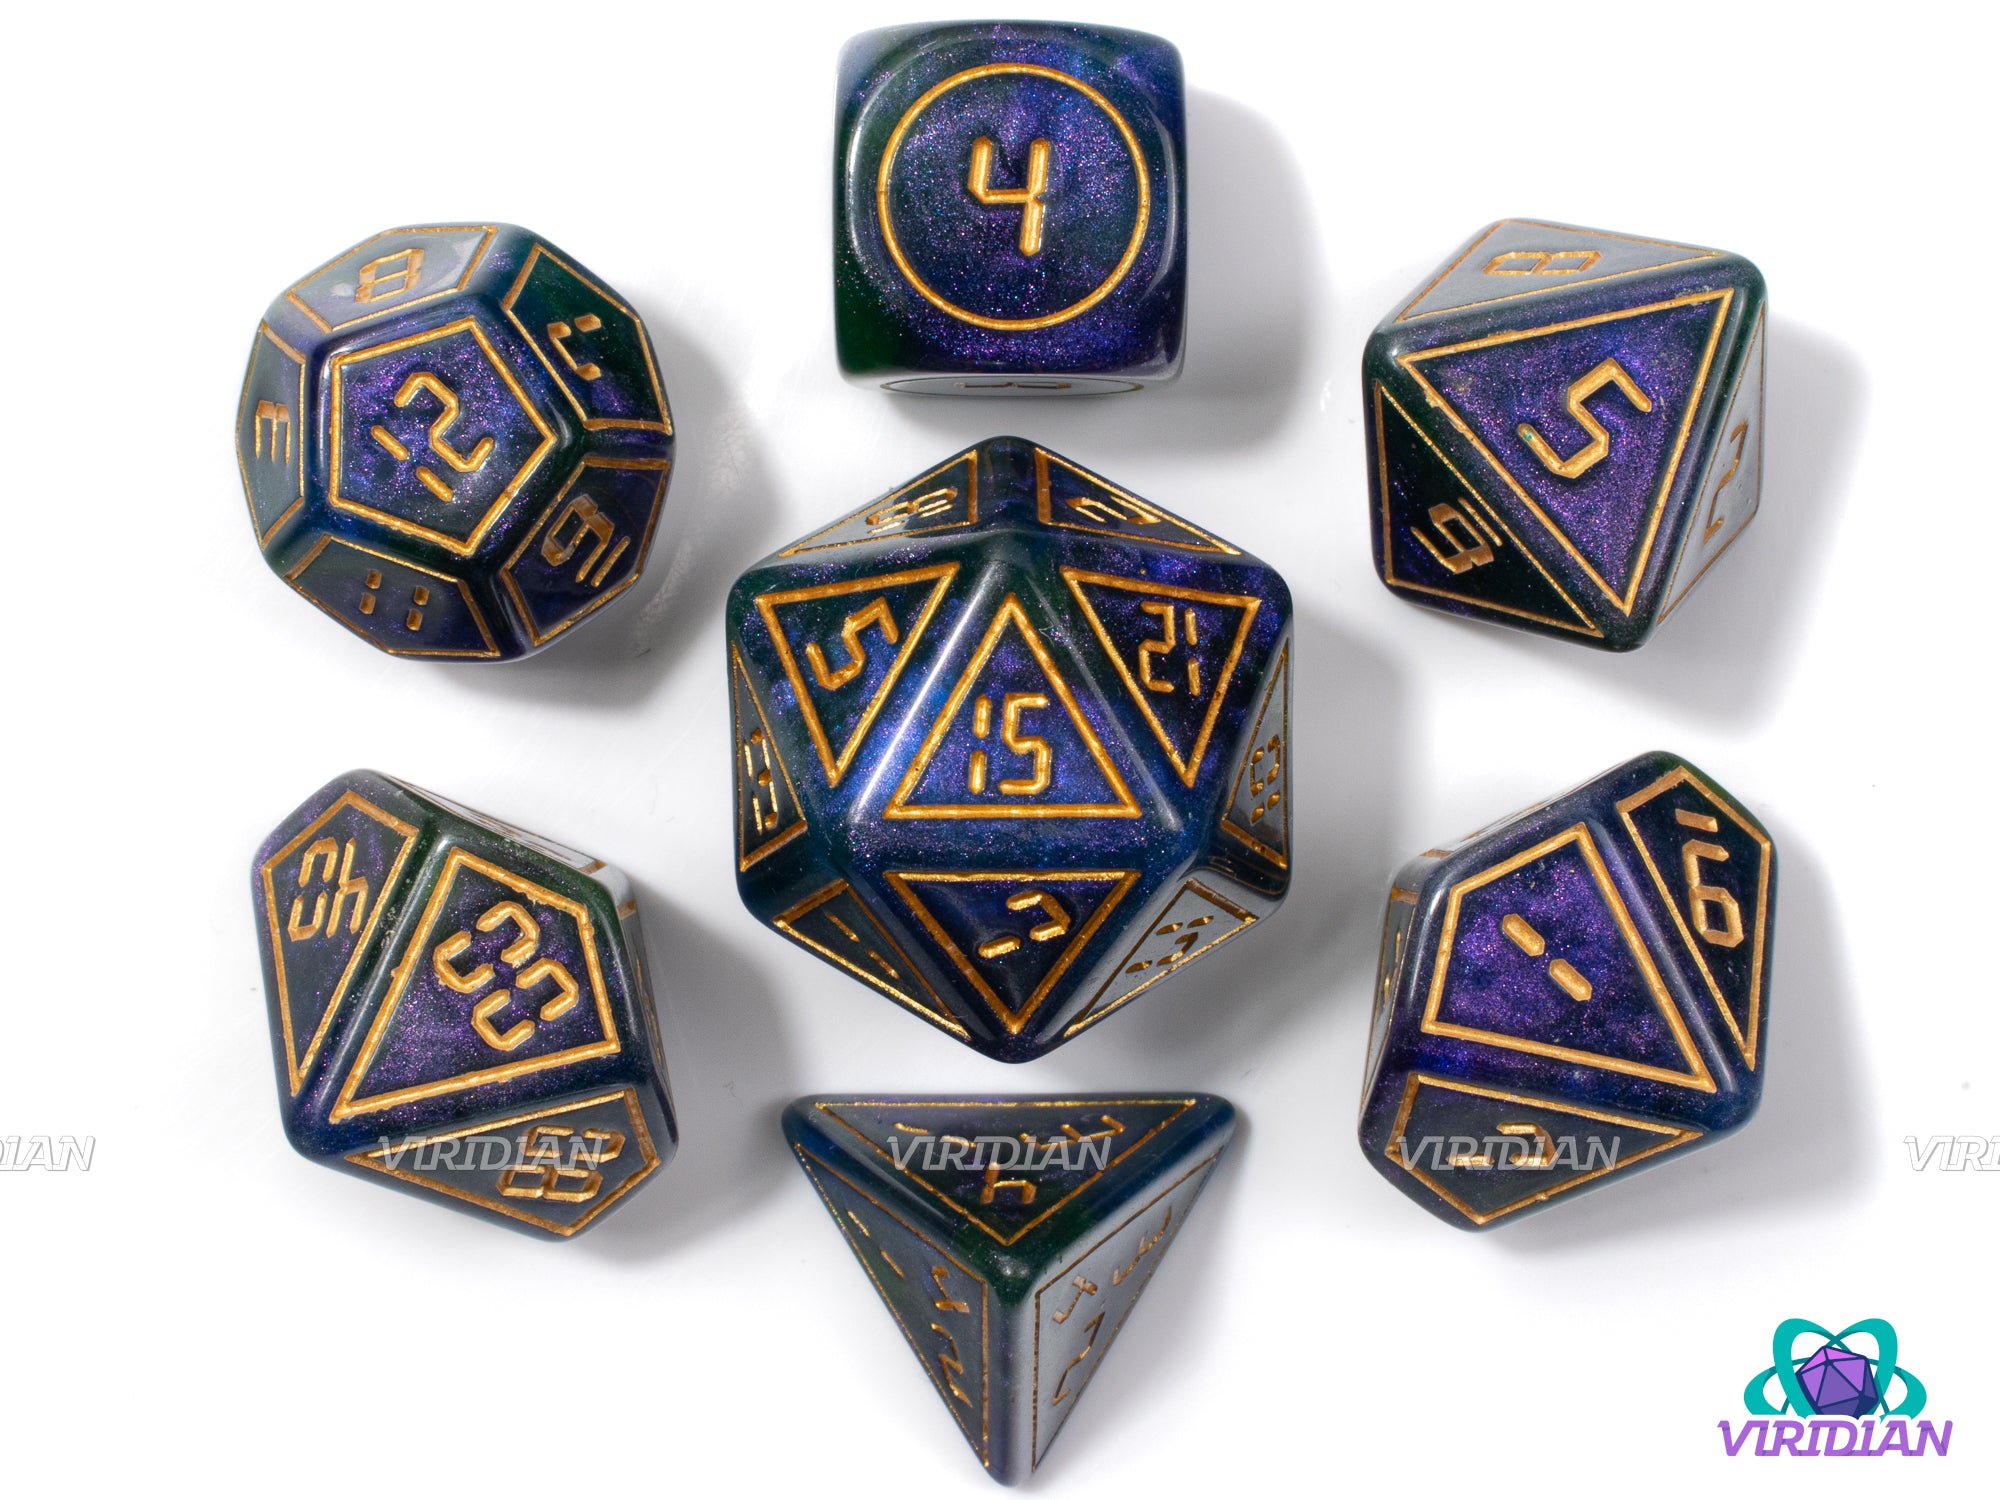 Another Dimension | Purple-Blue & Green-Black, Glittery, Digital Gold Font w Accents | Resin Dice Set (7)